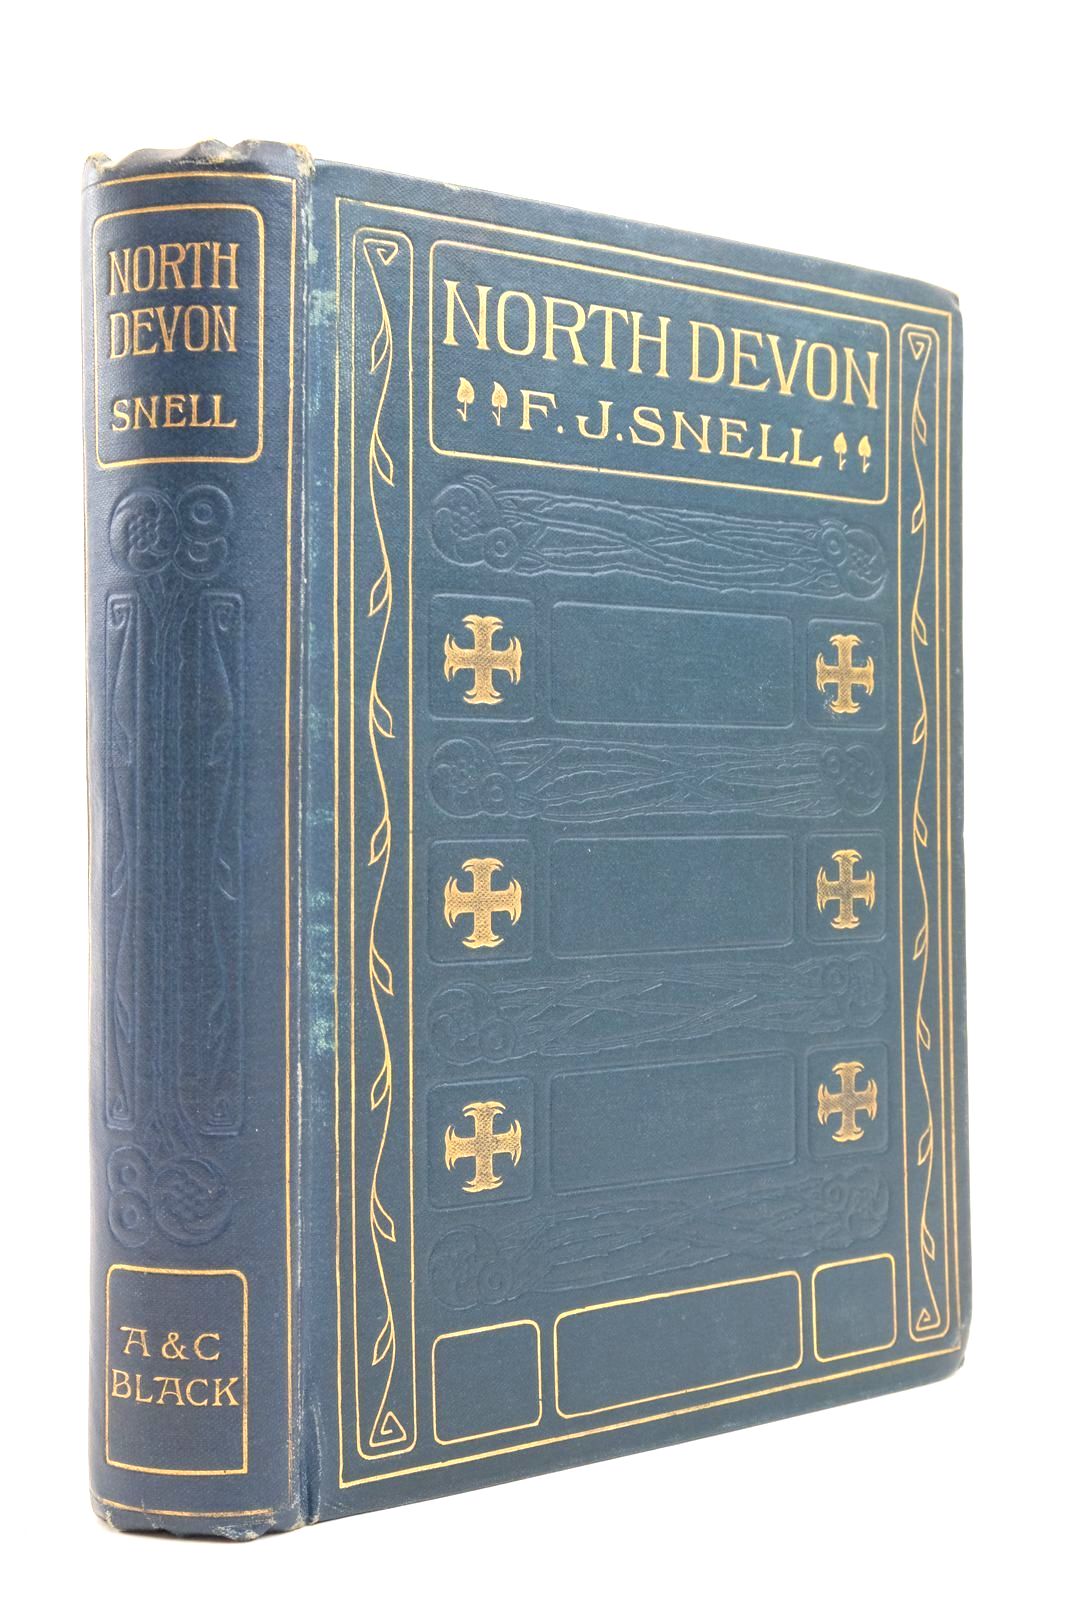 Photo of NORTH DEVON written by Snell, F.J. illustrated by Wimbush, Henry B. published by Adam & Charles Black (STOCK CODE: 2137467)  for sale by Stella & Rose's Books